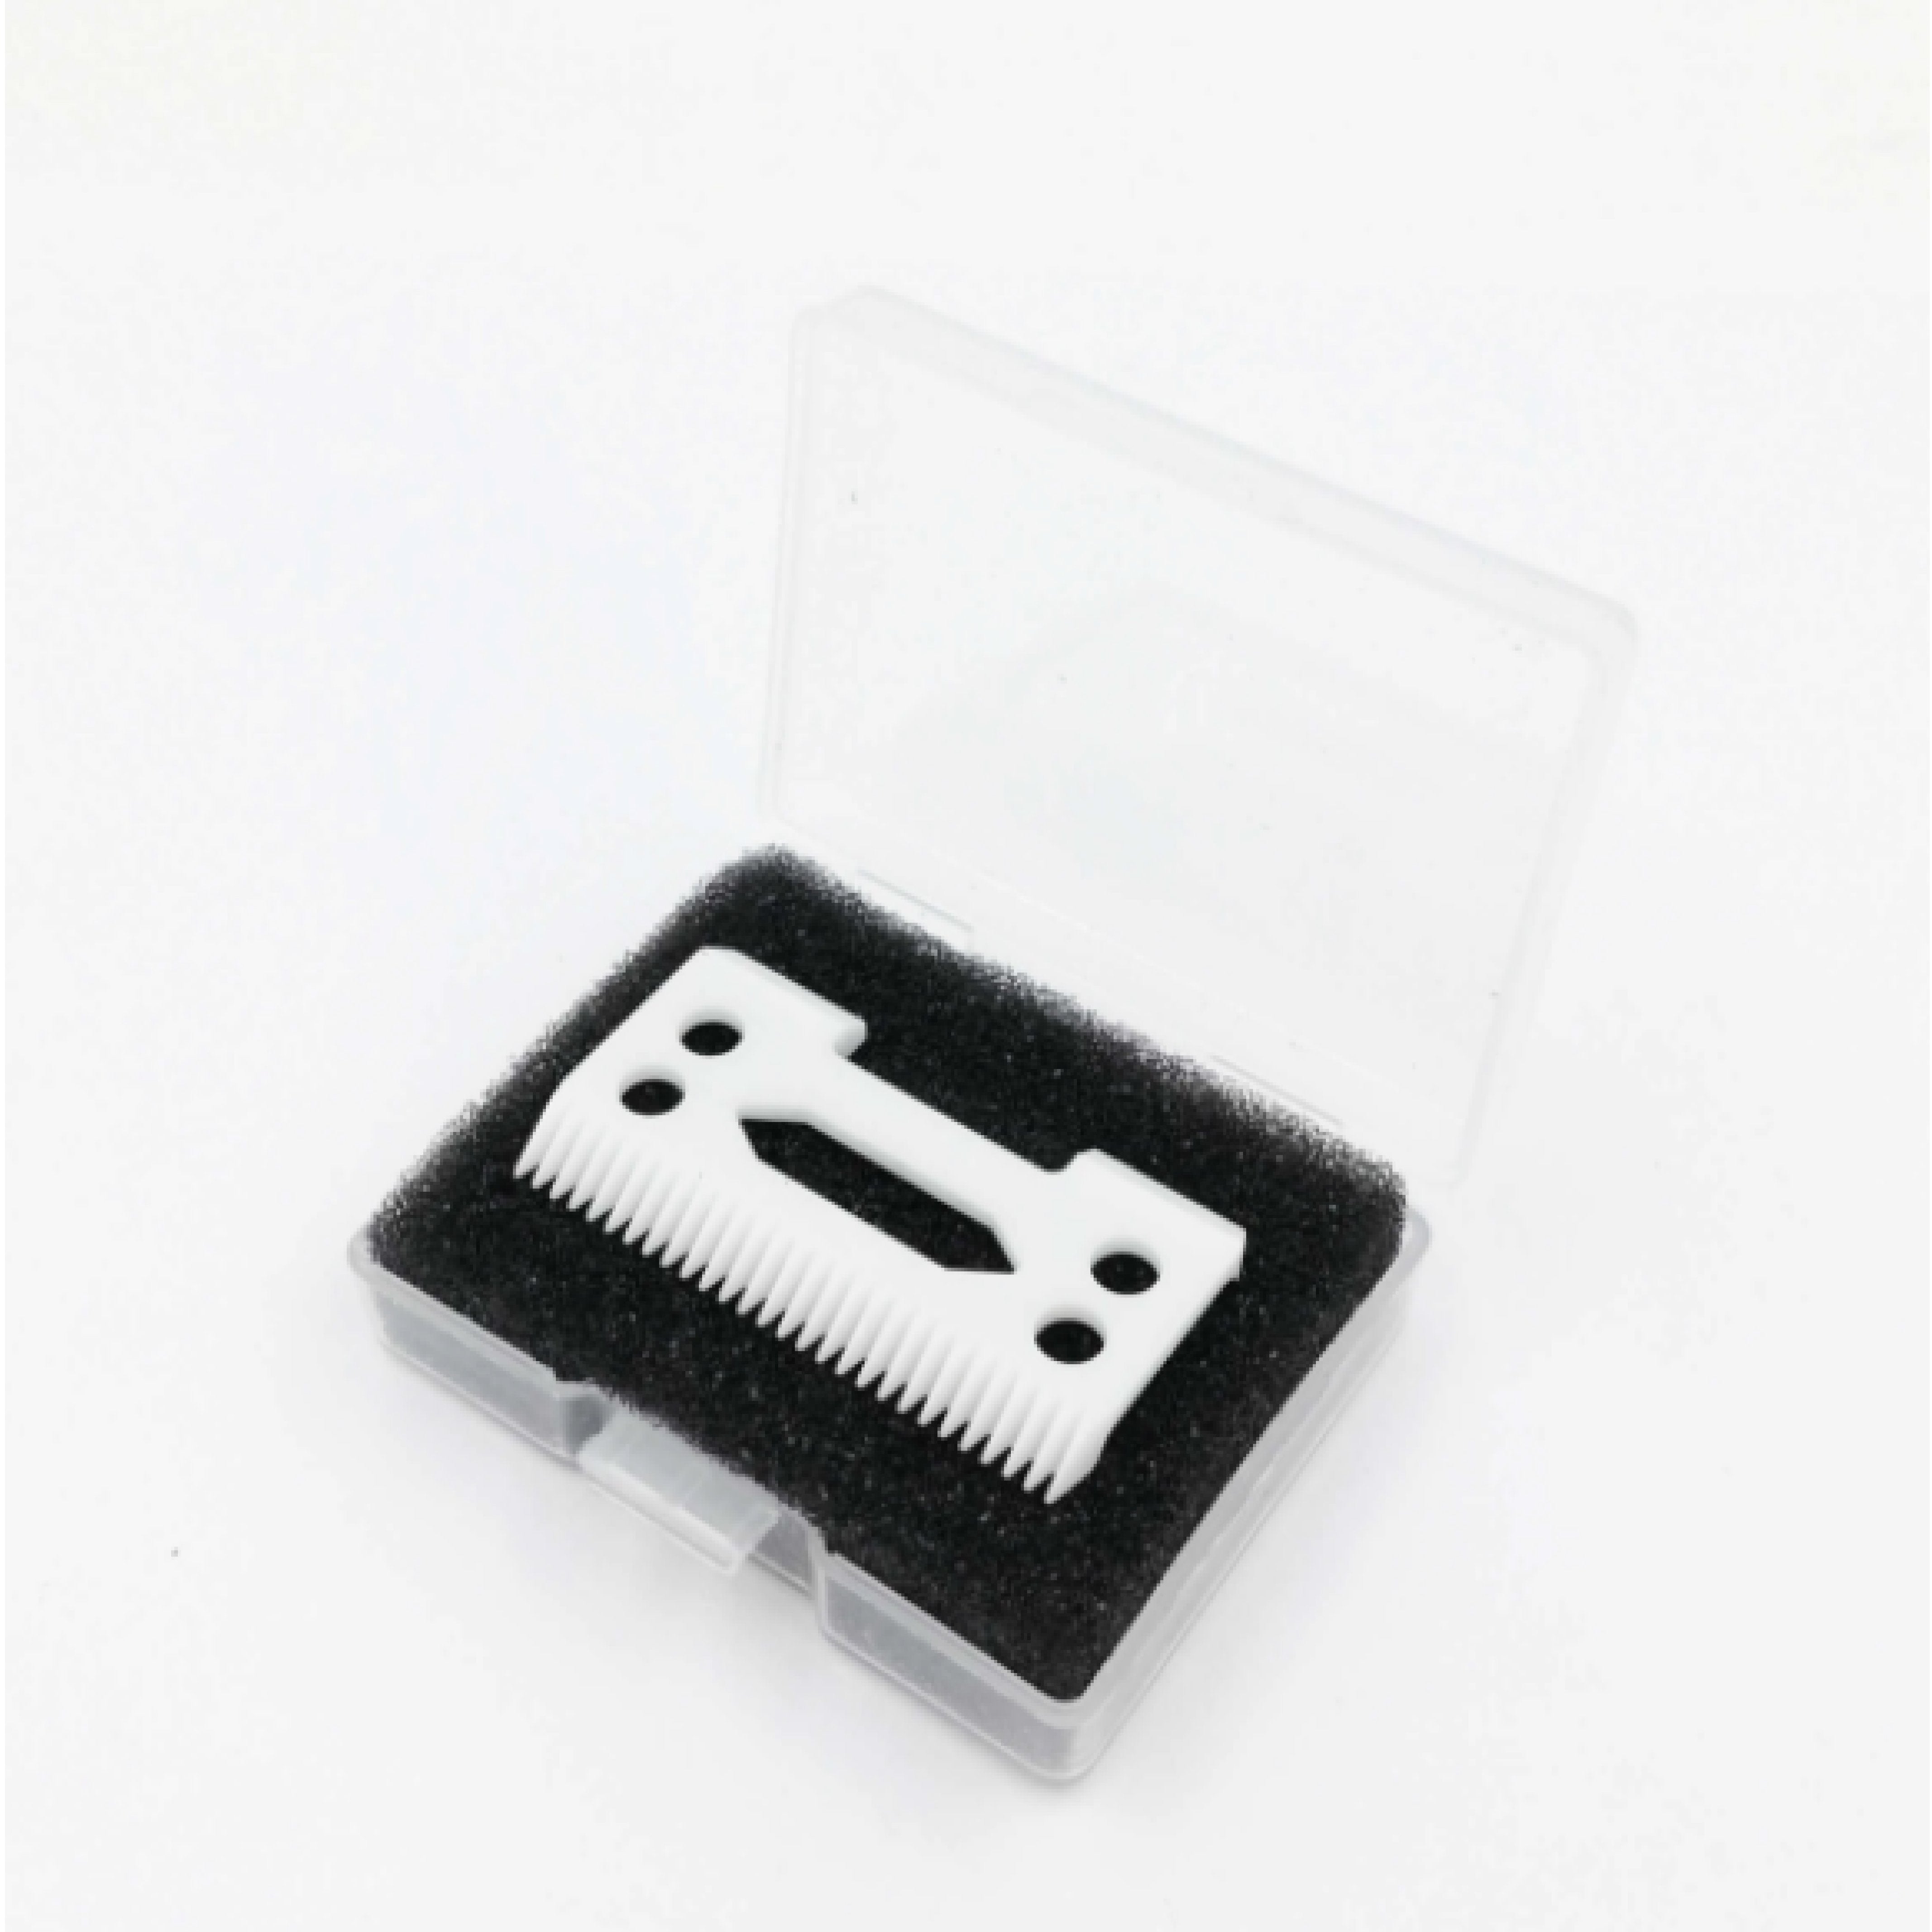 2-Hole Ceramic Cutting Blades For Wahl Clippers